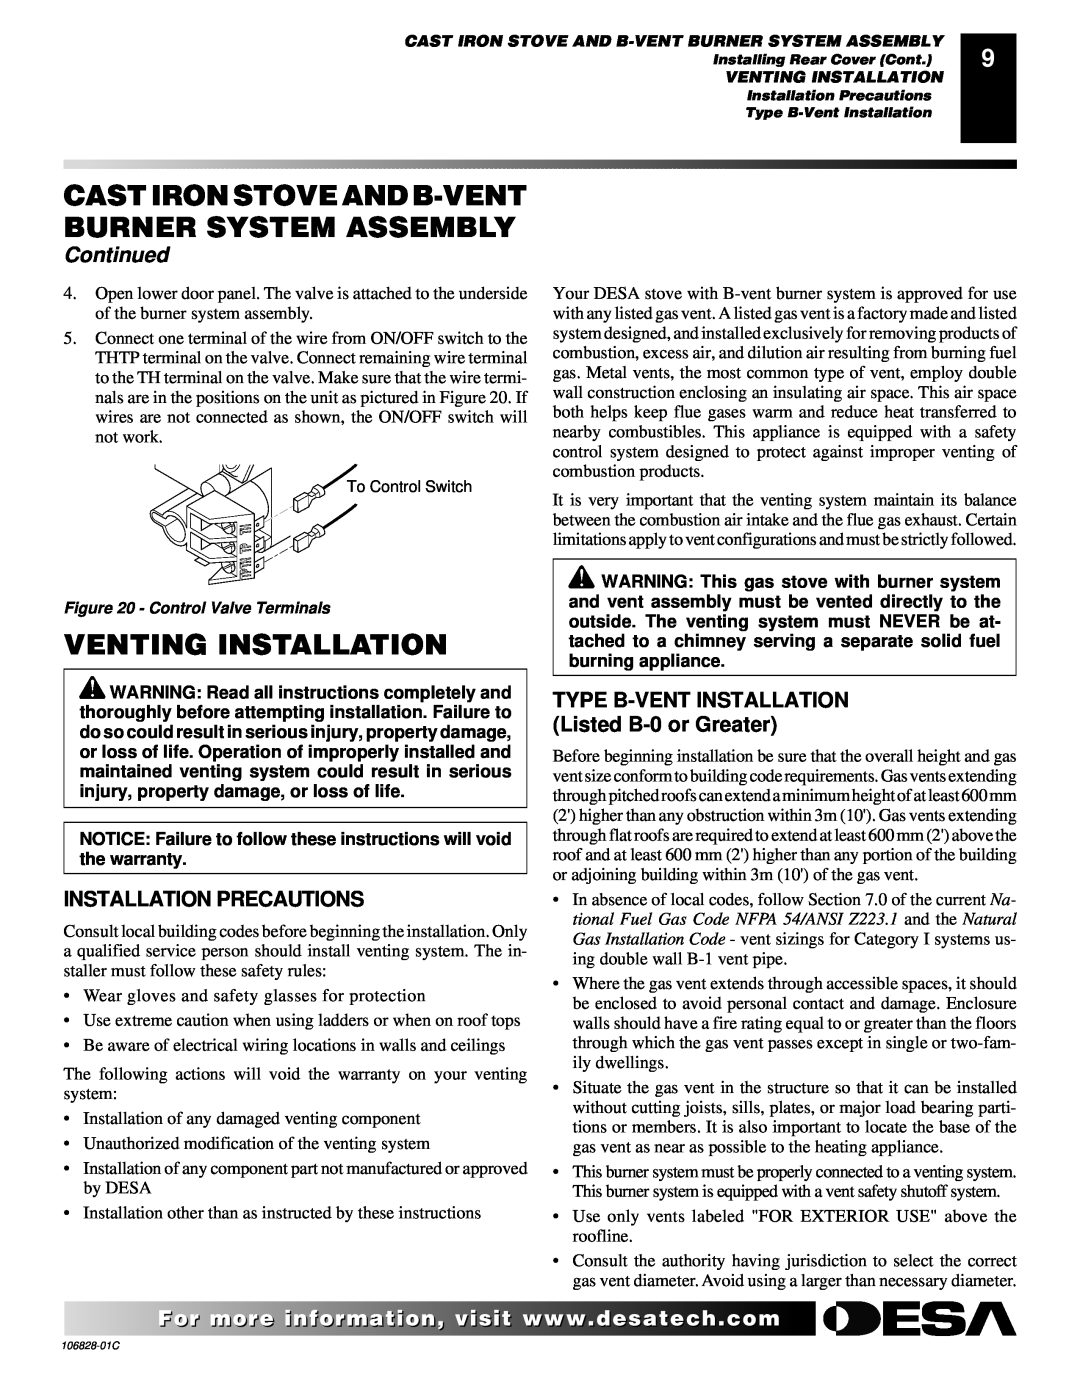 Desa SBVBP(C) Venting Installation, Installation Precautions, TYPE B-VENT INSTALLATION Listed B-0 or Greater, Continued 